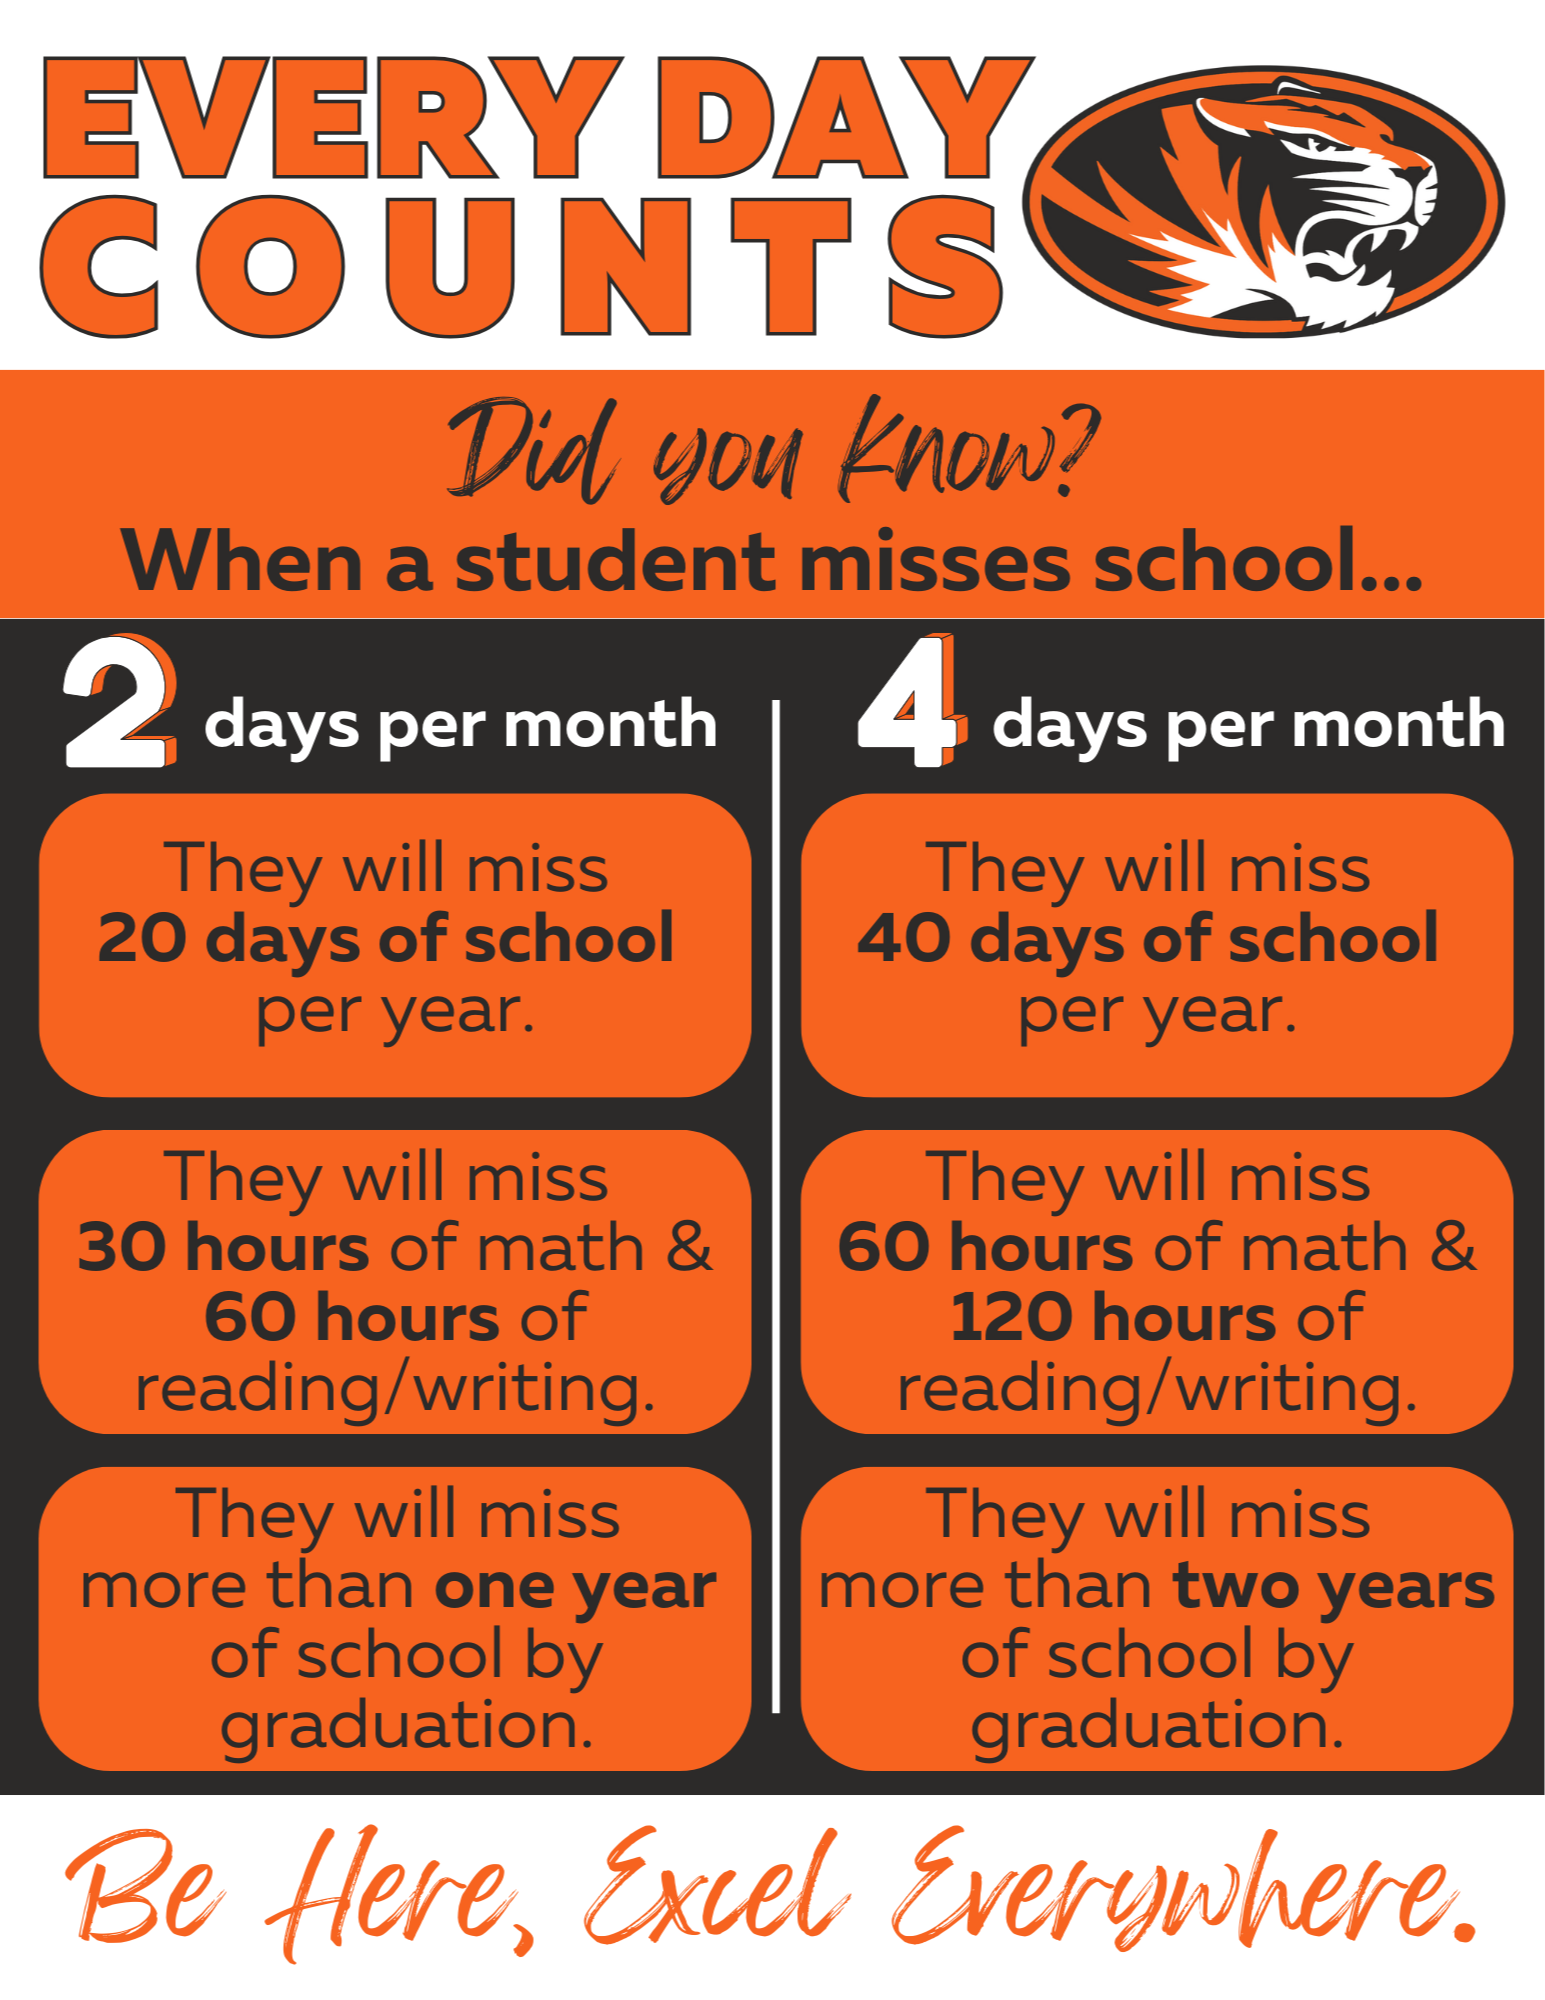 EVERY DAY  COUNTS Did you know? When a student misses school... days per month They will miss  20 days of school  per year. They will miss  30 hours of math & 60 hours of reading/writing. They will miss  more than one year  of school by graduation.  days per month They will miss  40 days of school  per year. They will miss  60 hours of math & 120 hours of reading/writing. They will miss  more than two years  of school by graduation. Be Here, Excel Everywhere.